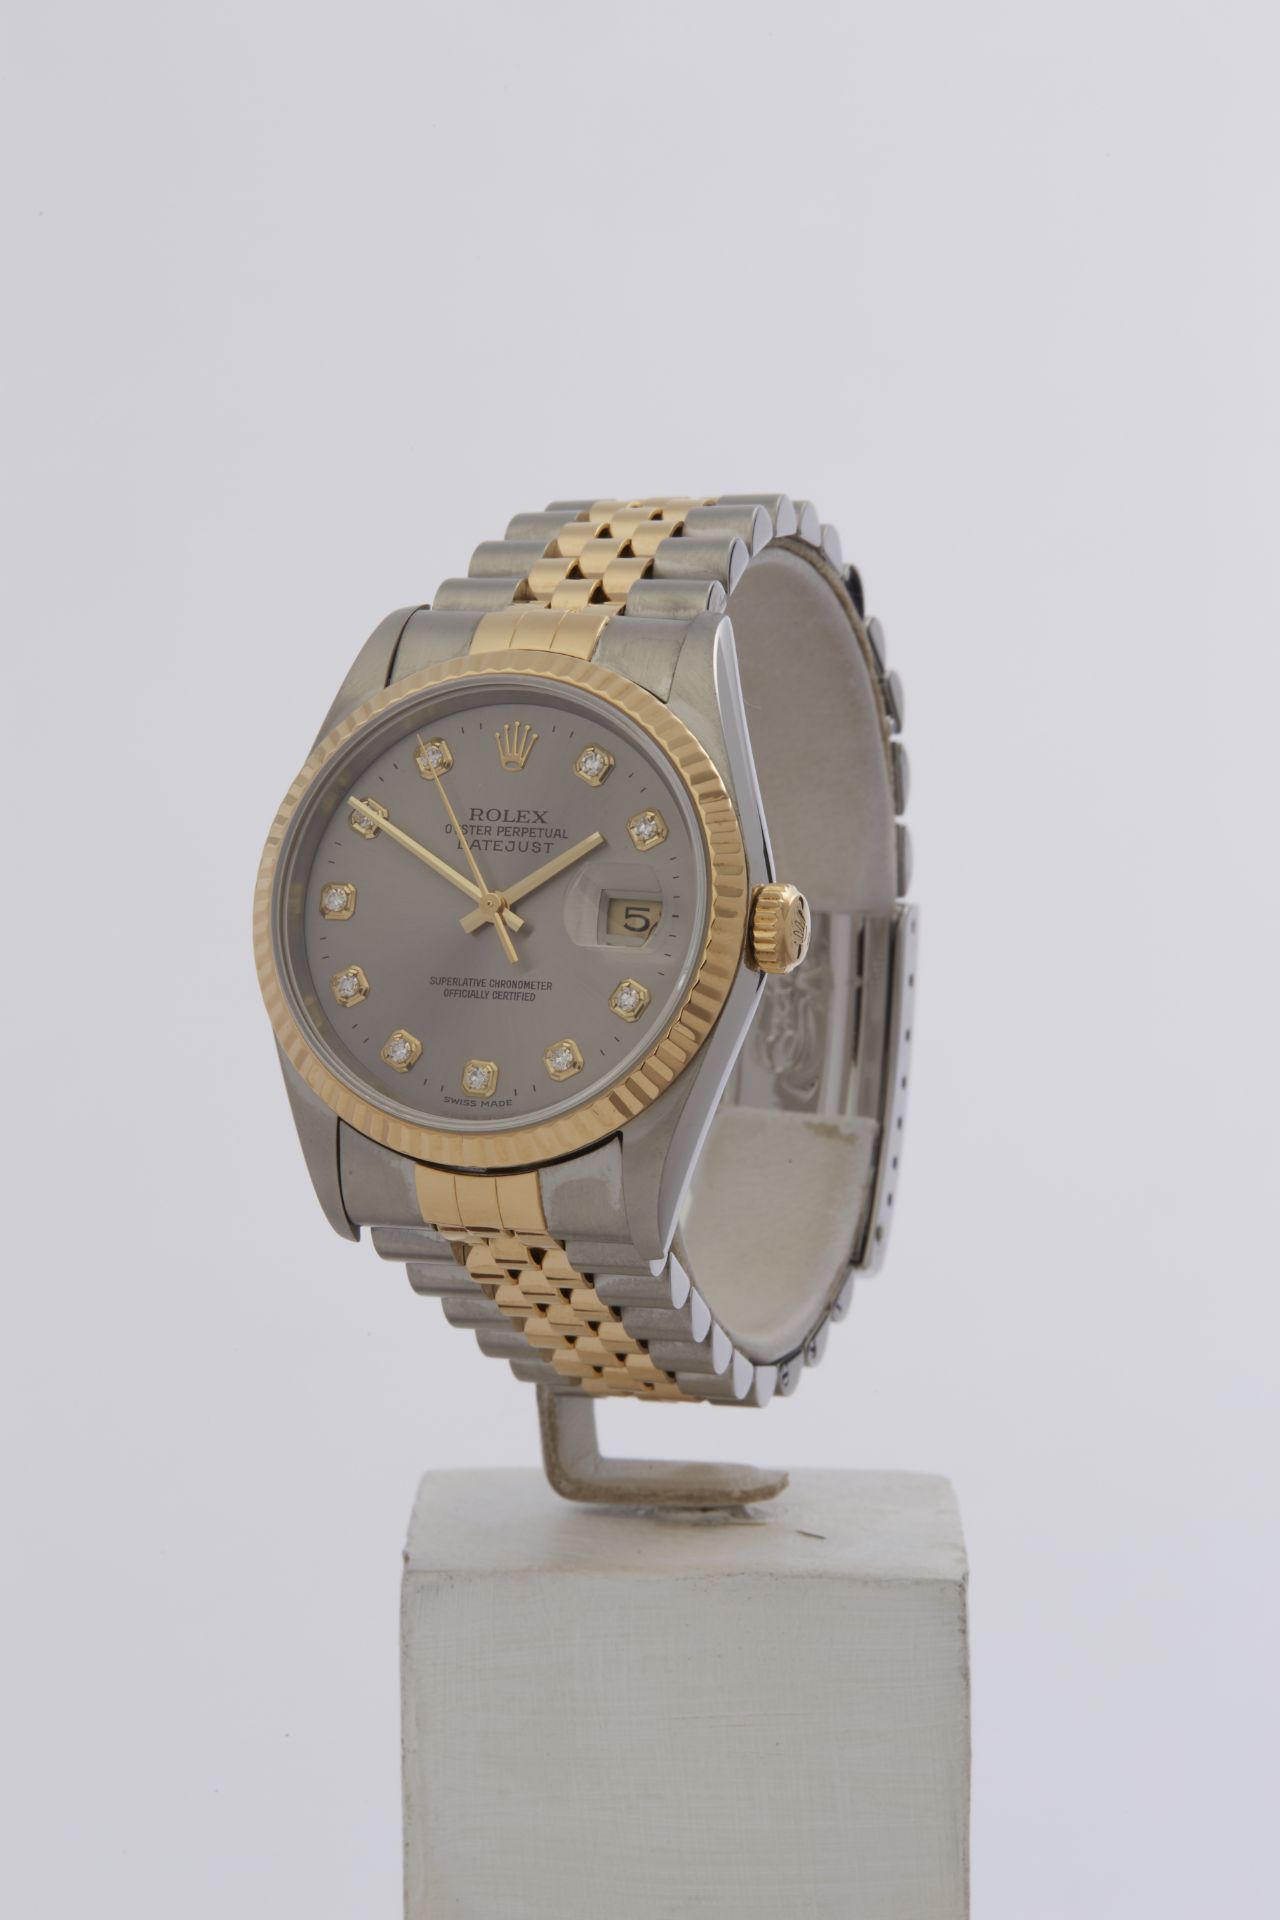 Rolex Datejust 36 Stainless Steel & 18K Yellow Gold - 16233 - Image 2 of 3